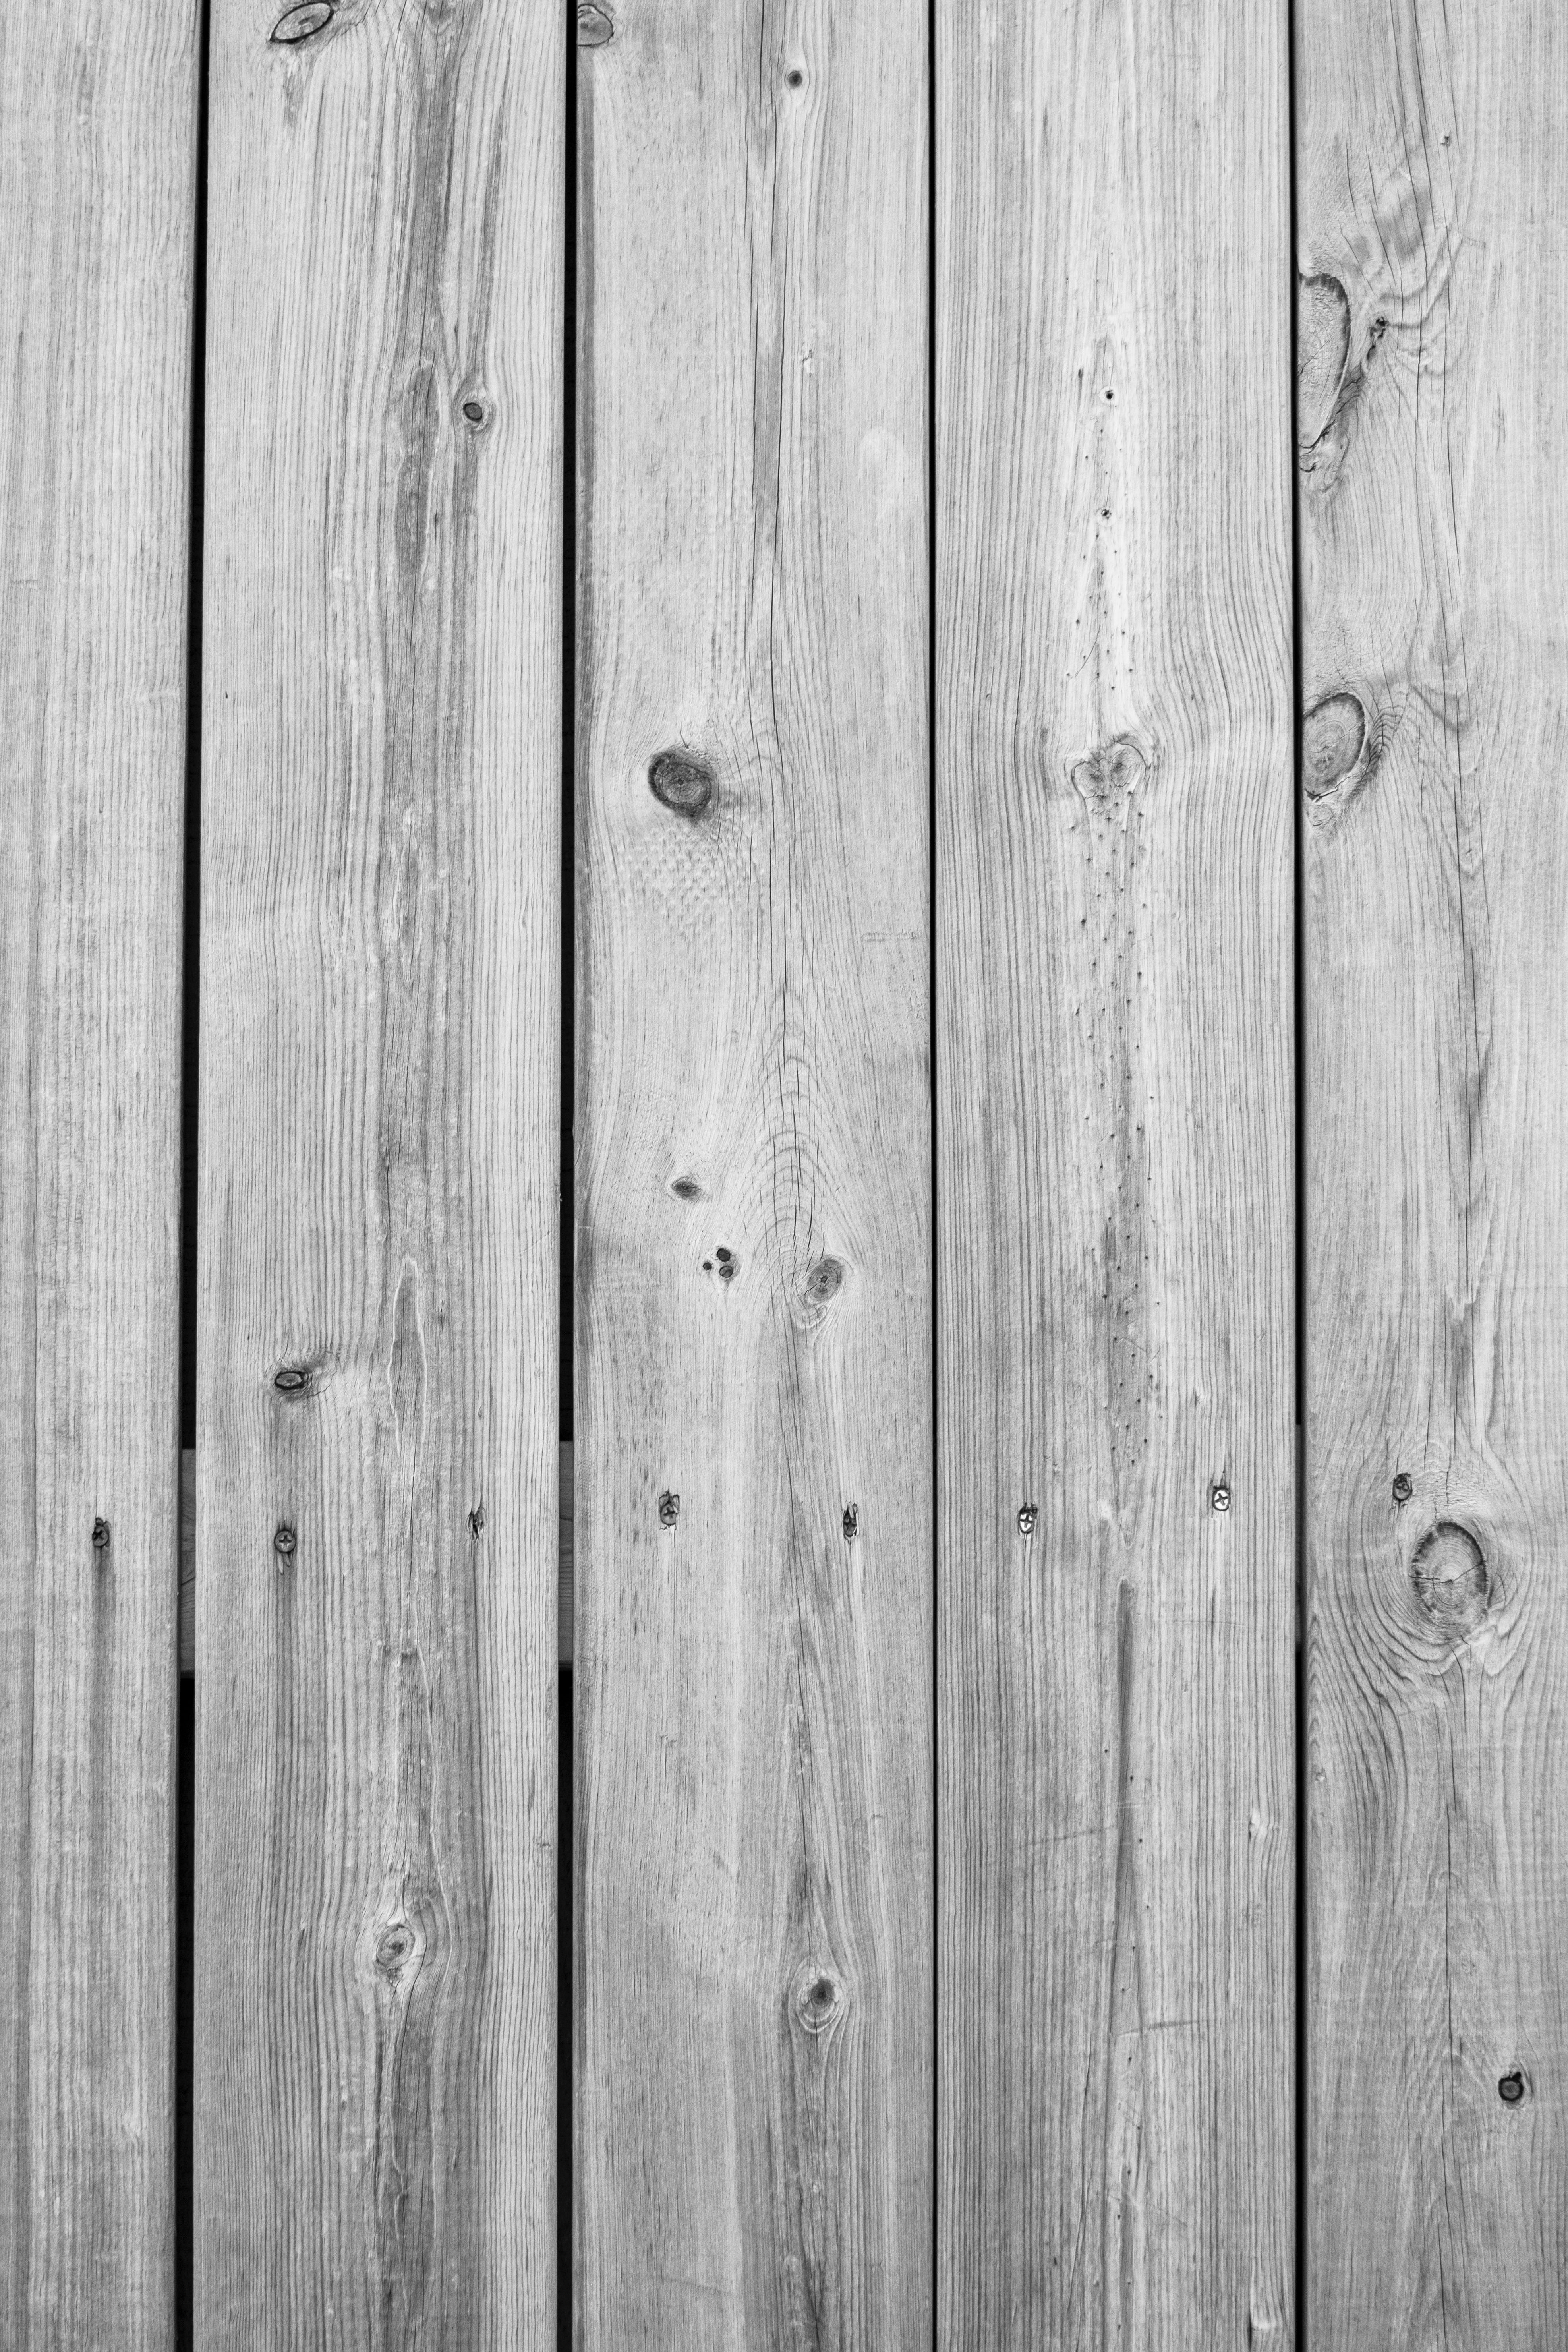 board, planks, wooden, wood, texture, textures, fence, bw, chb